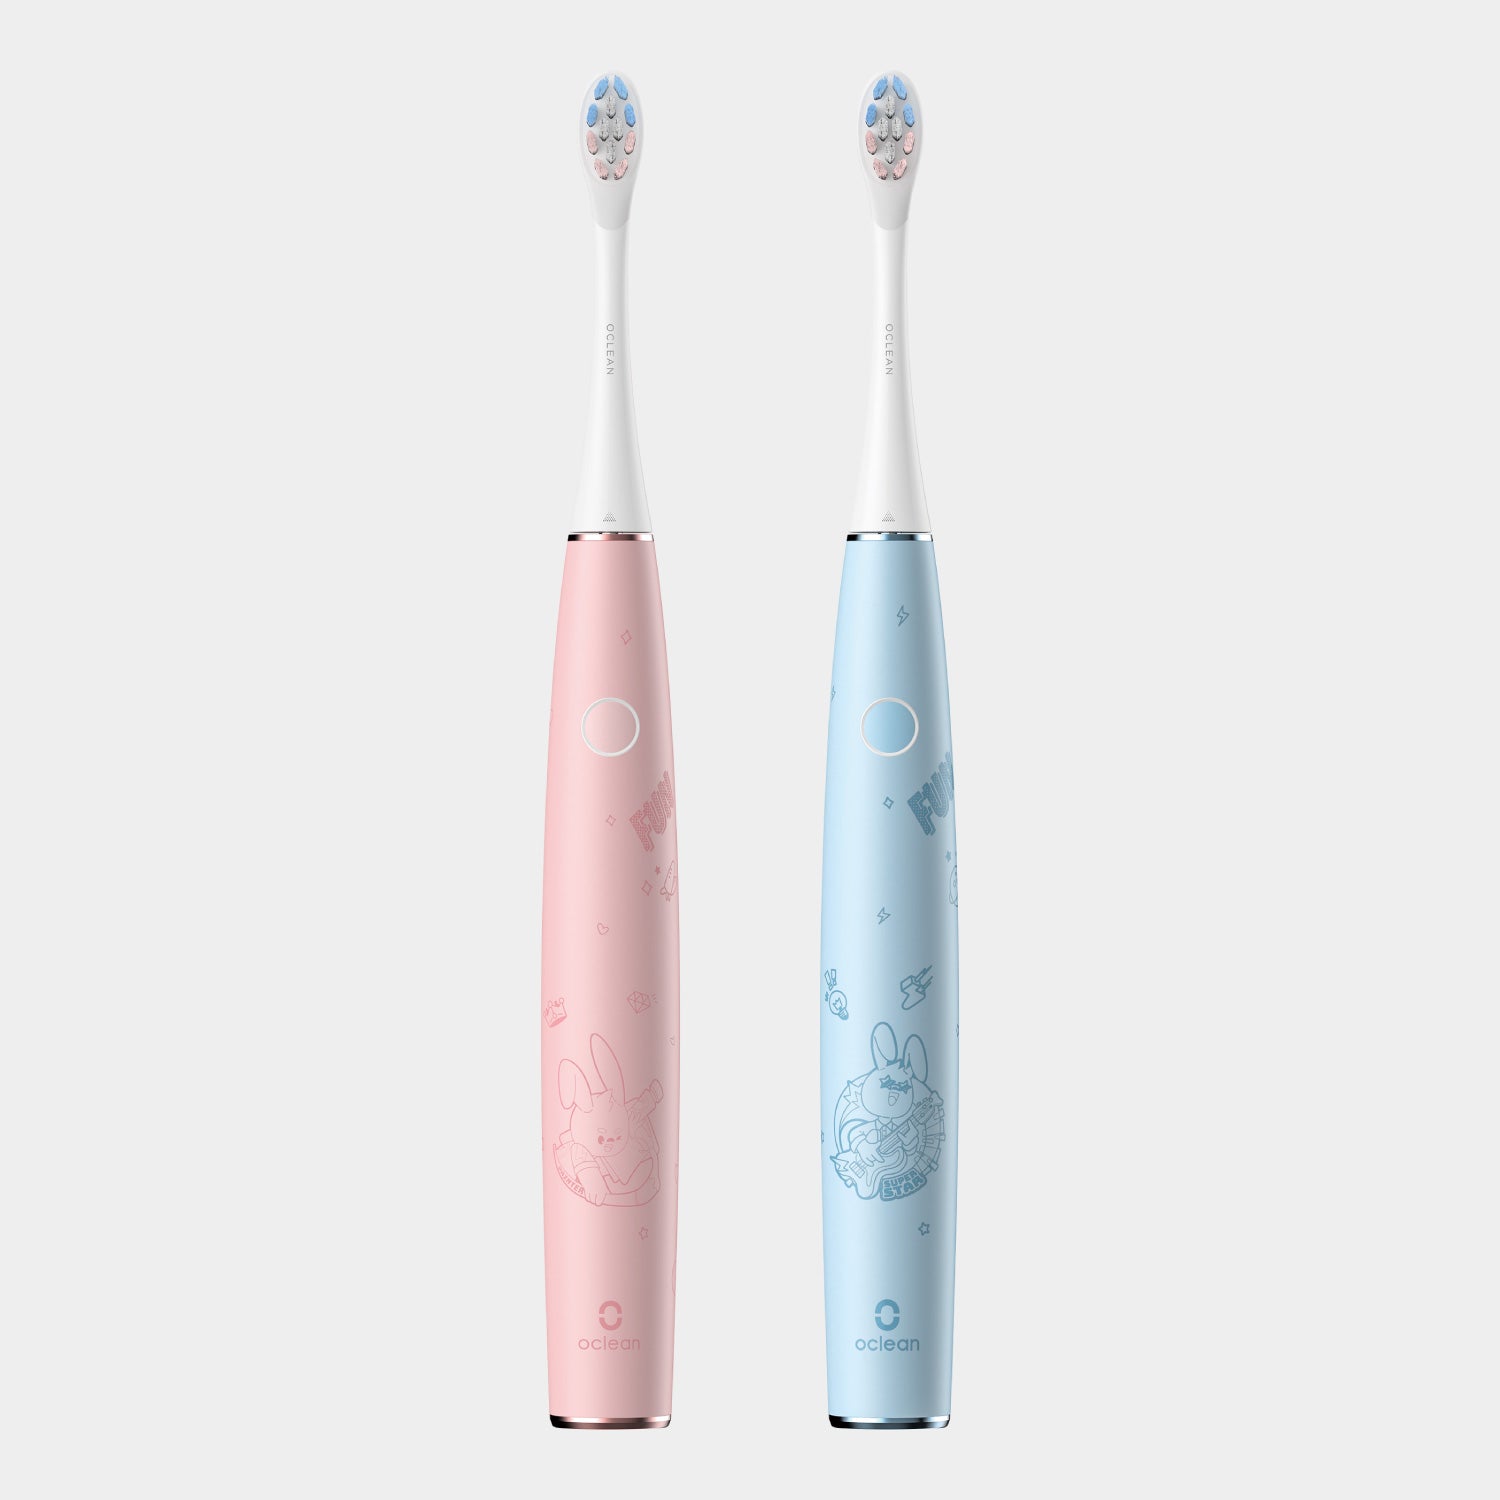 Oclean Kids Electric Toothbrush-Toothbrushes-Oclean US Store